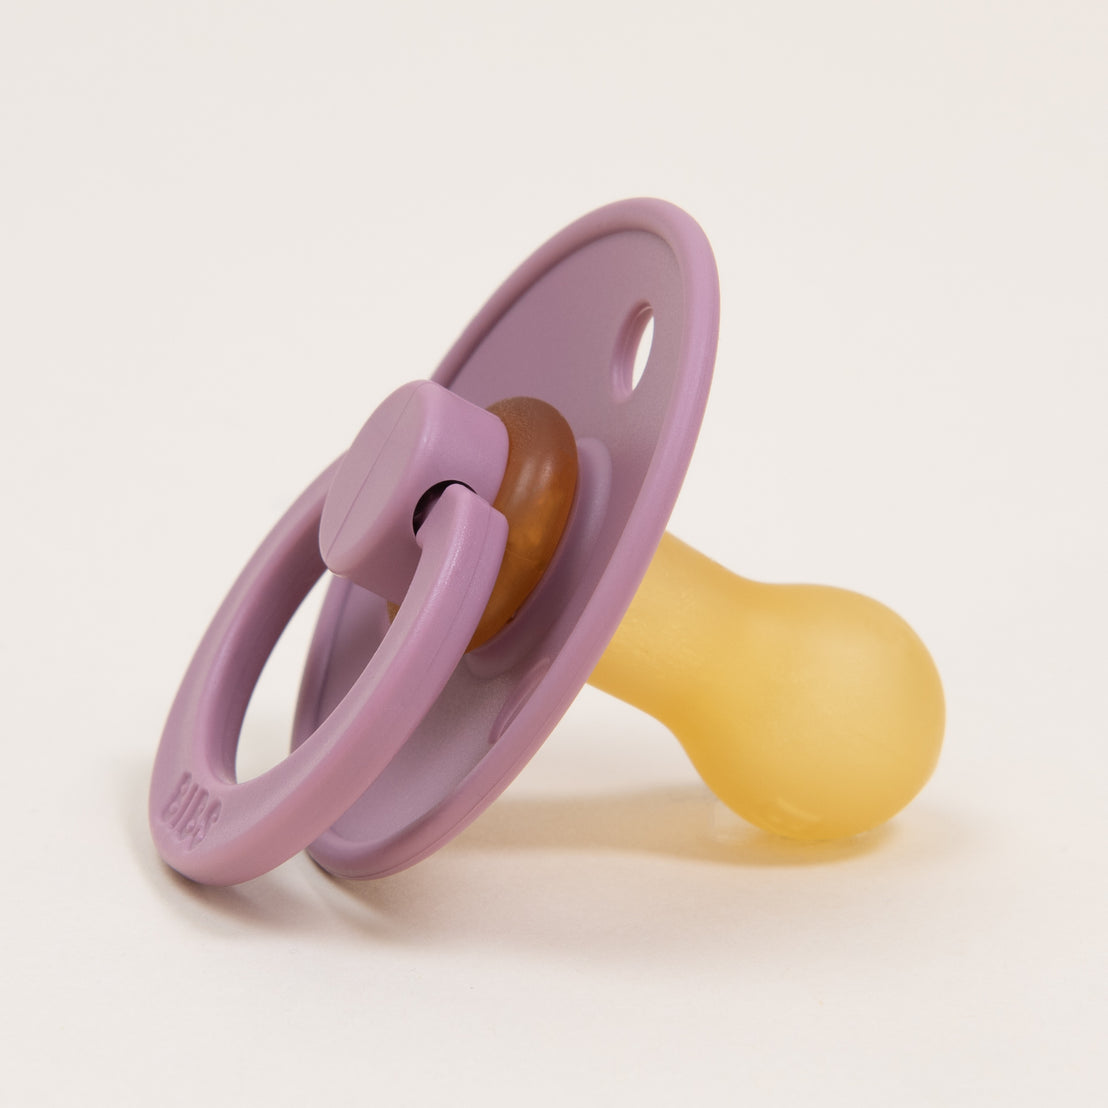 A purple Bibs Pacifier in Heather lying on a white surface. The pacifier has a purple handle and rim, with a beige nipple.